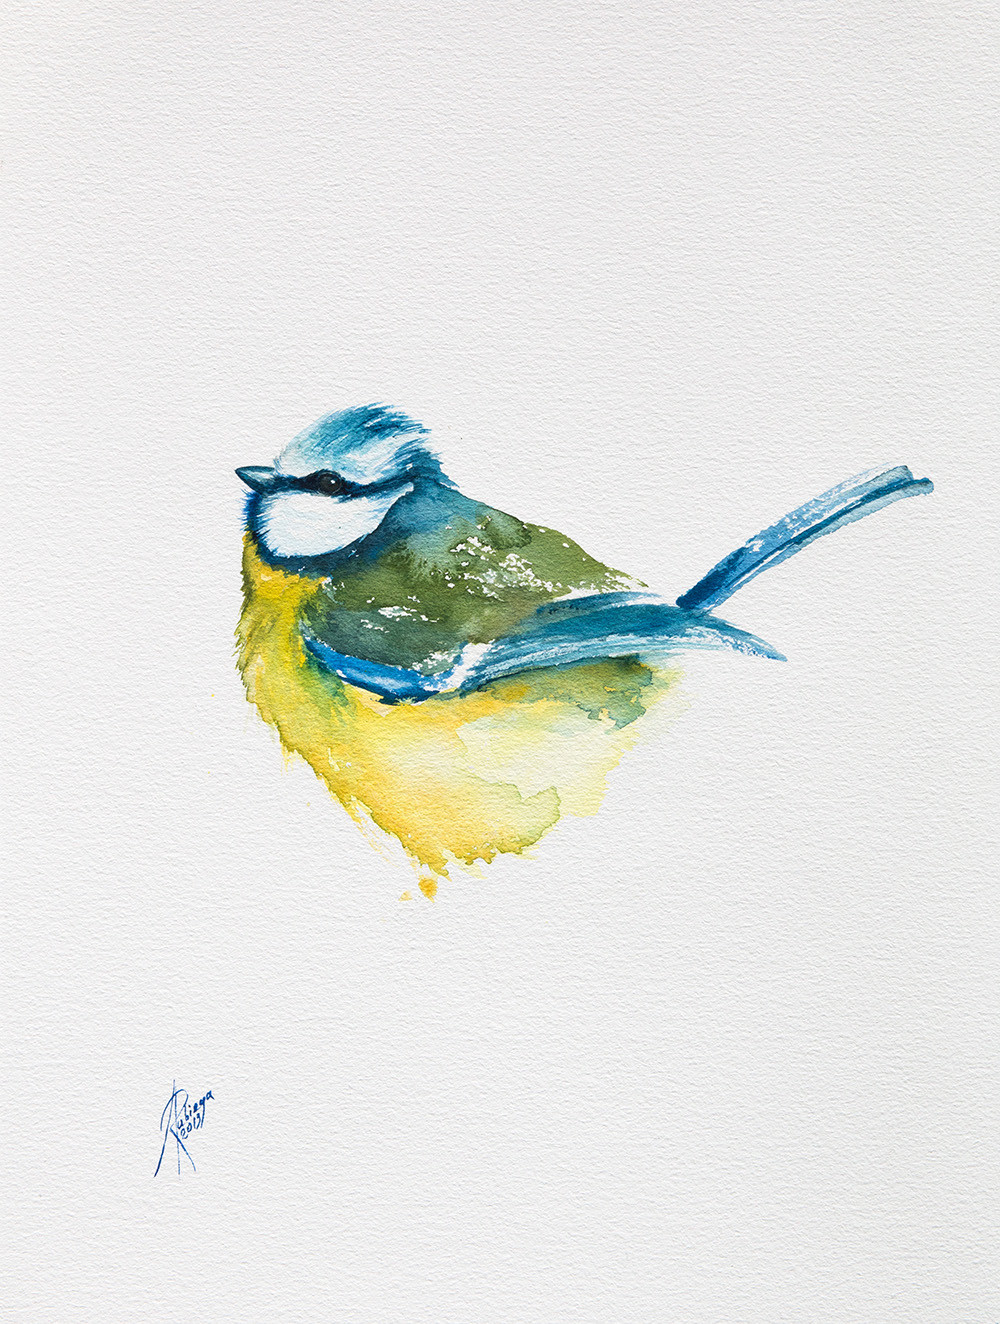 Blue Tit watercolor and ink